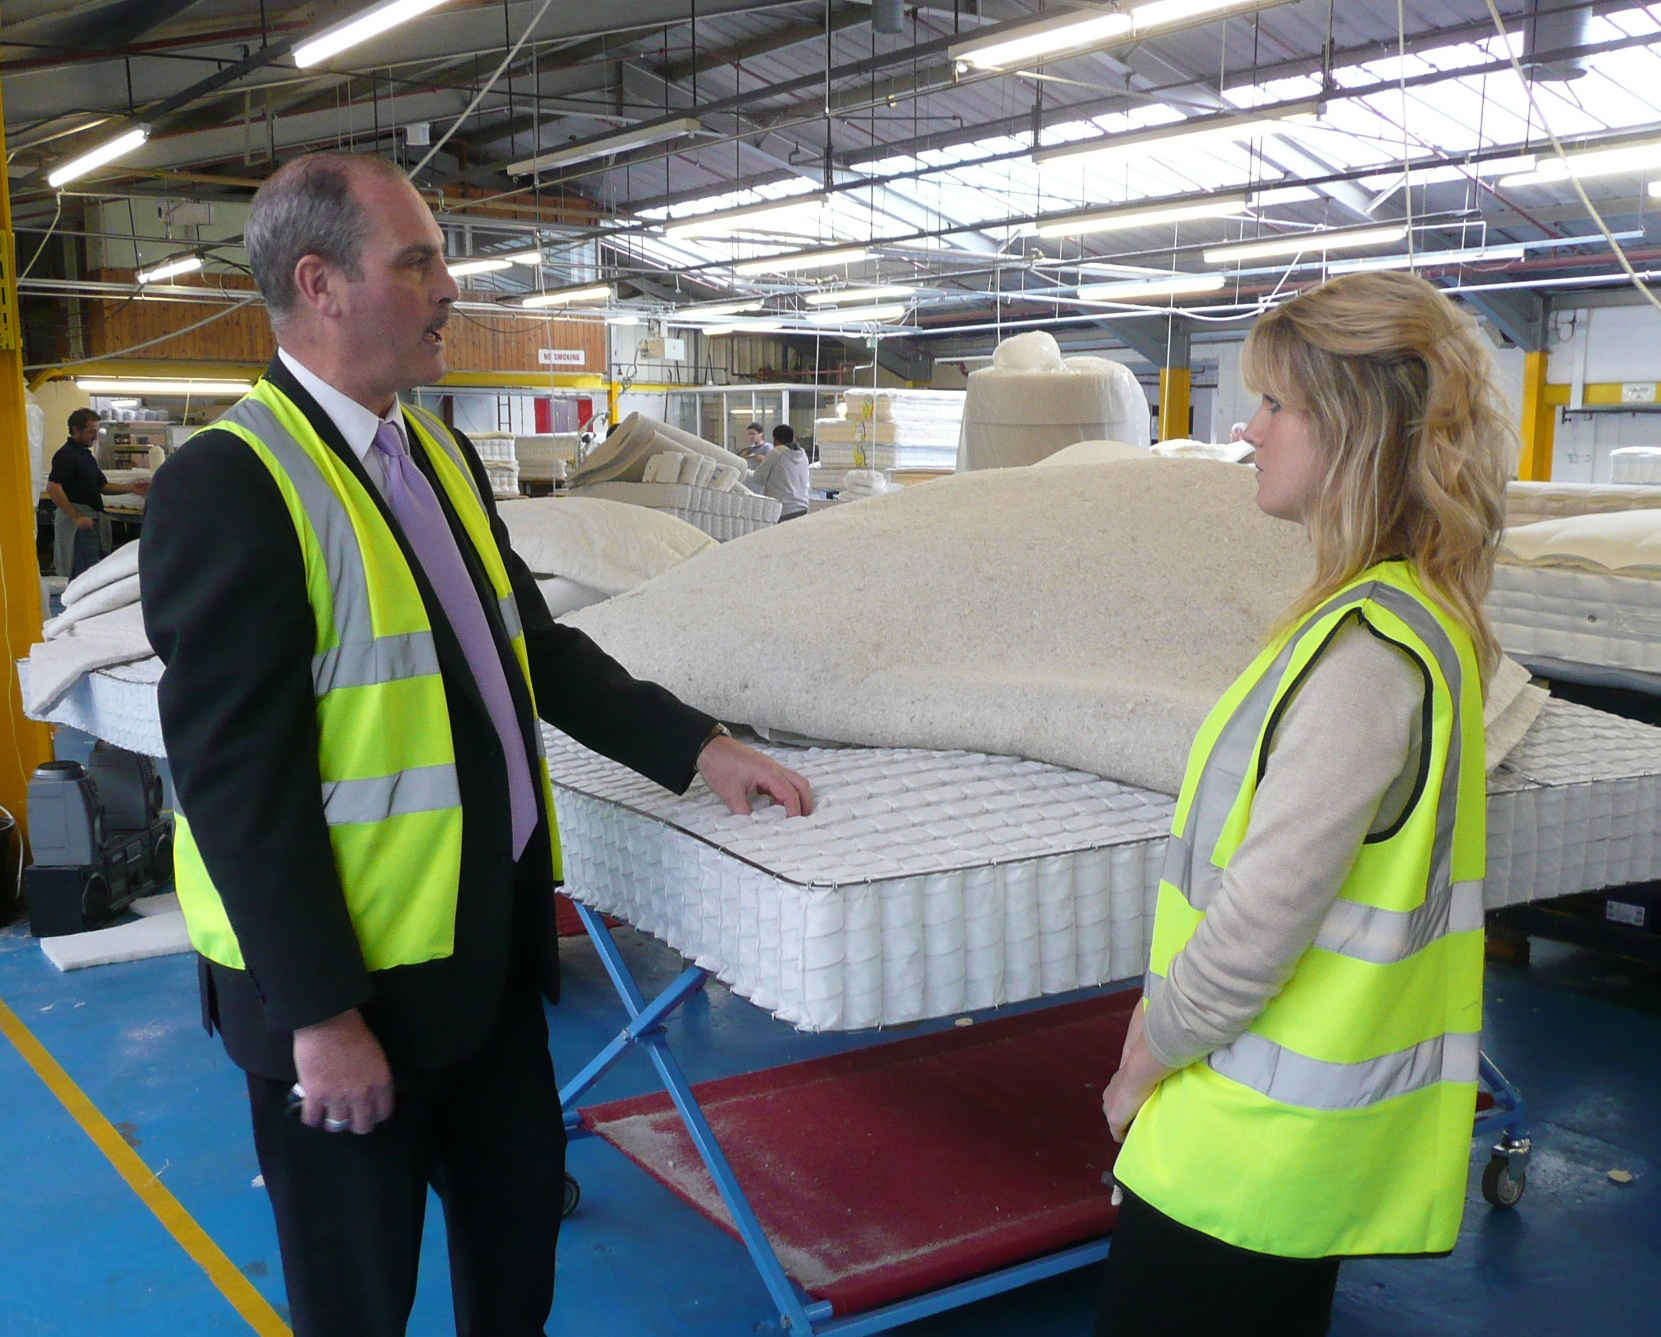 Park Grove research handcrafted mattresses